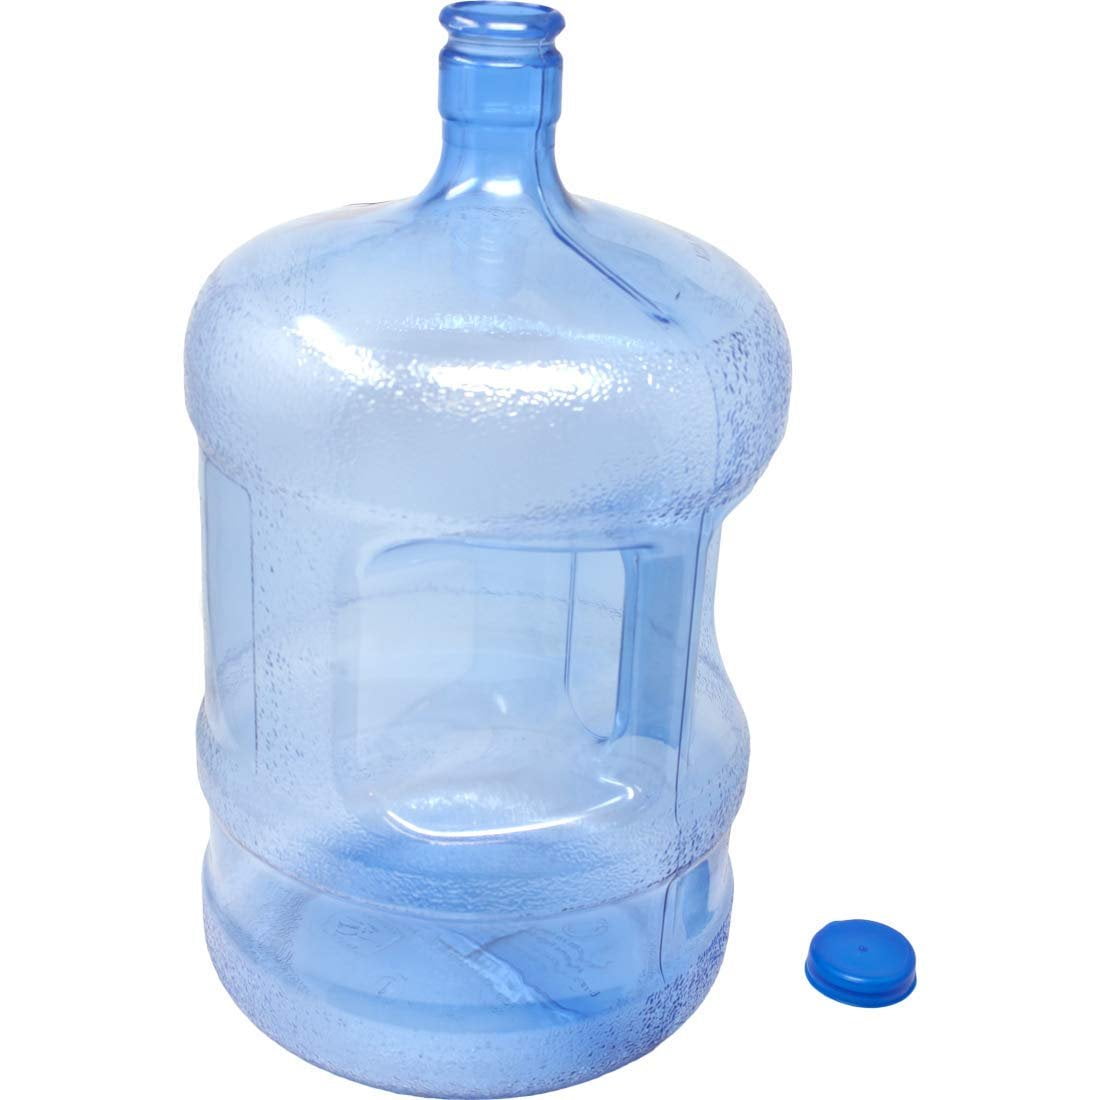 3 Gallon BPA-Free Reusable Plastic Beverage Dispenser Water Bottle Gallon Jug Container Made in USA 